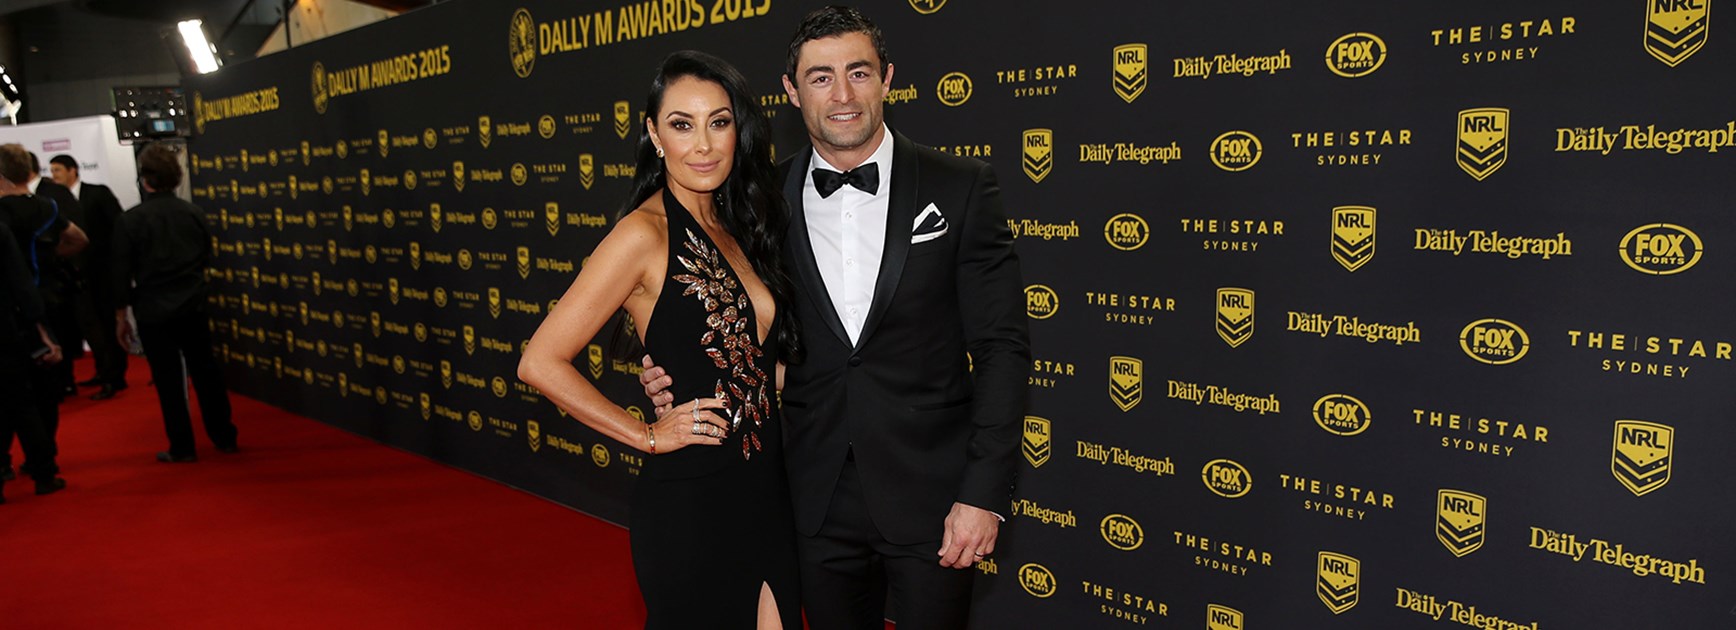 Terry Biviano and Anthony Minichiello on the Dally M Awards red carpet in 2015.